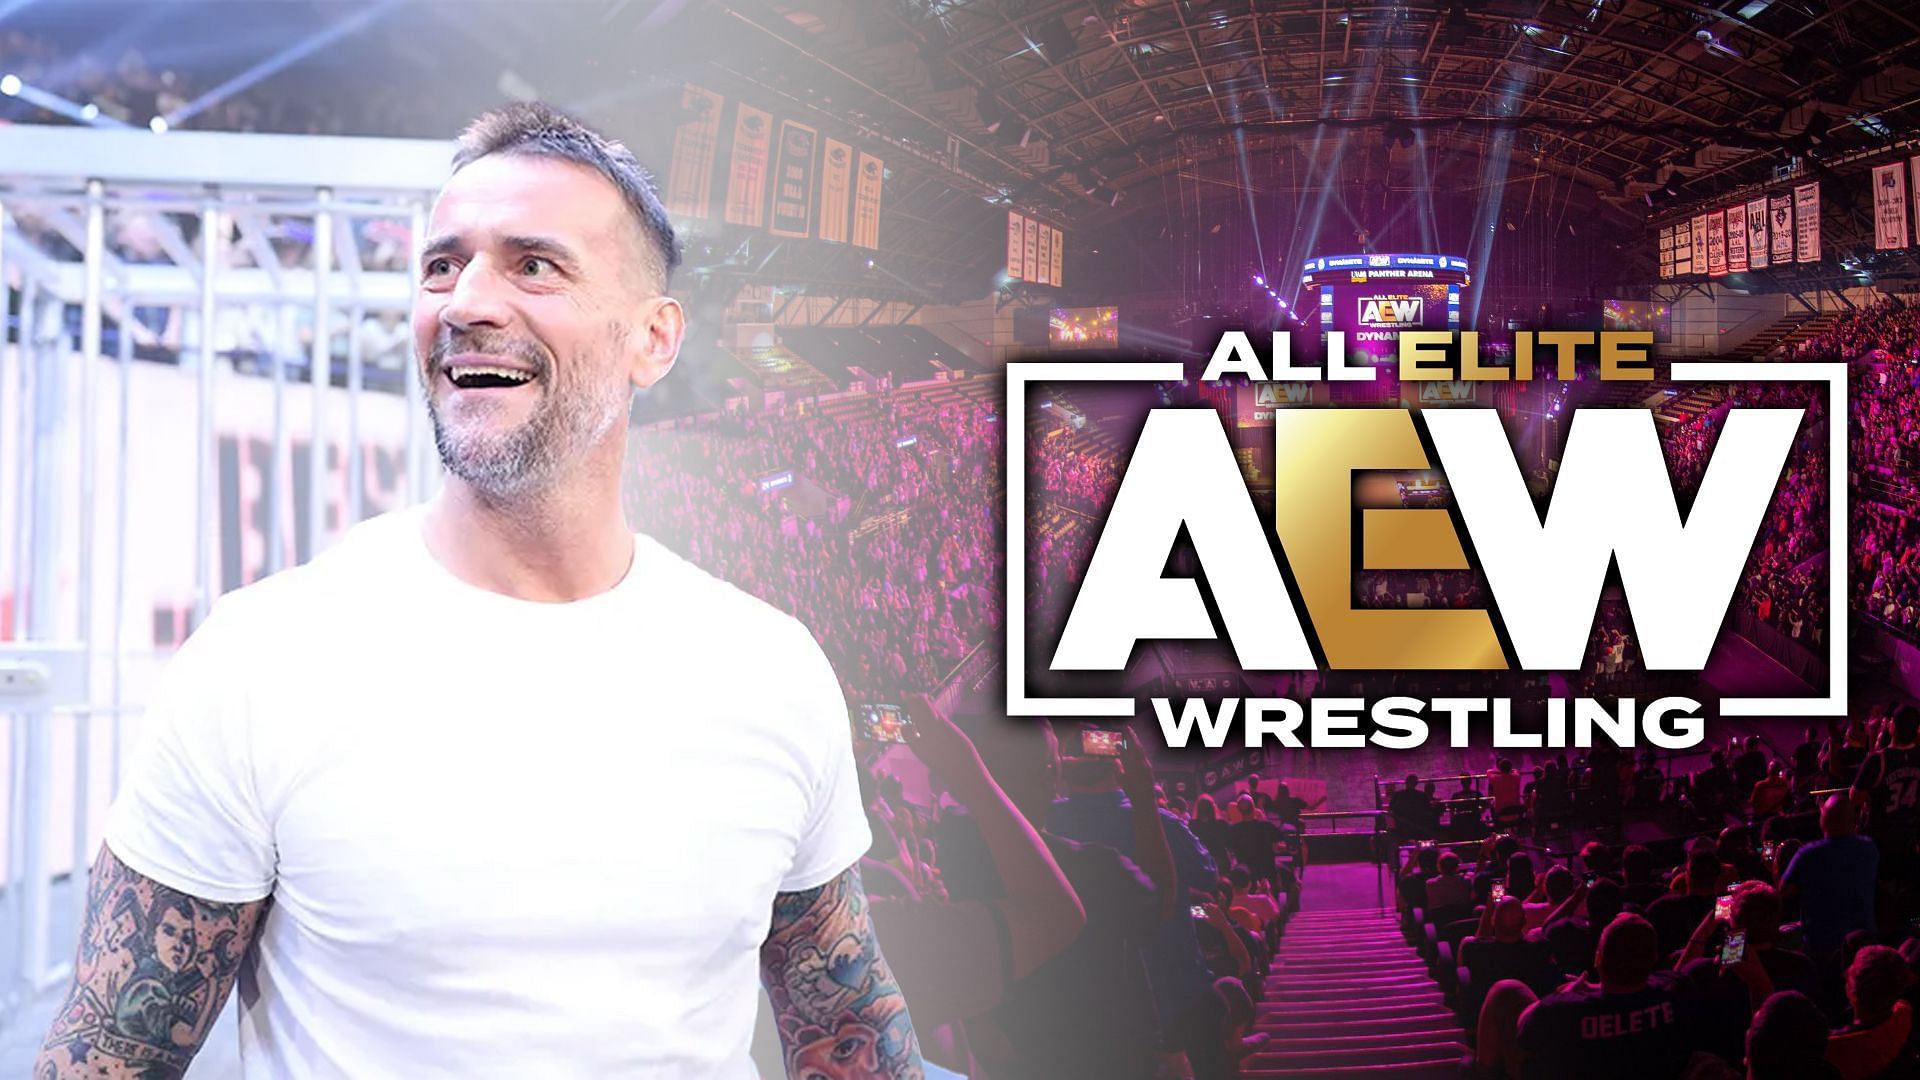 CM Punk is the first former AEW World Champion to sign with WWE